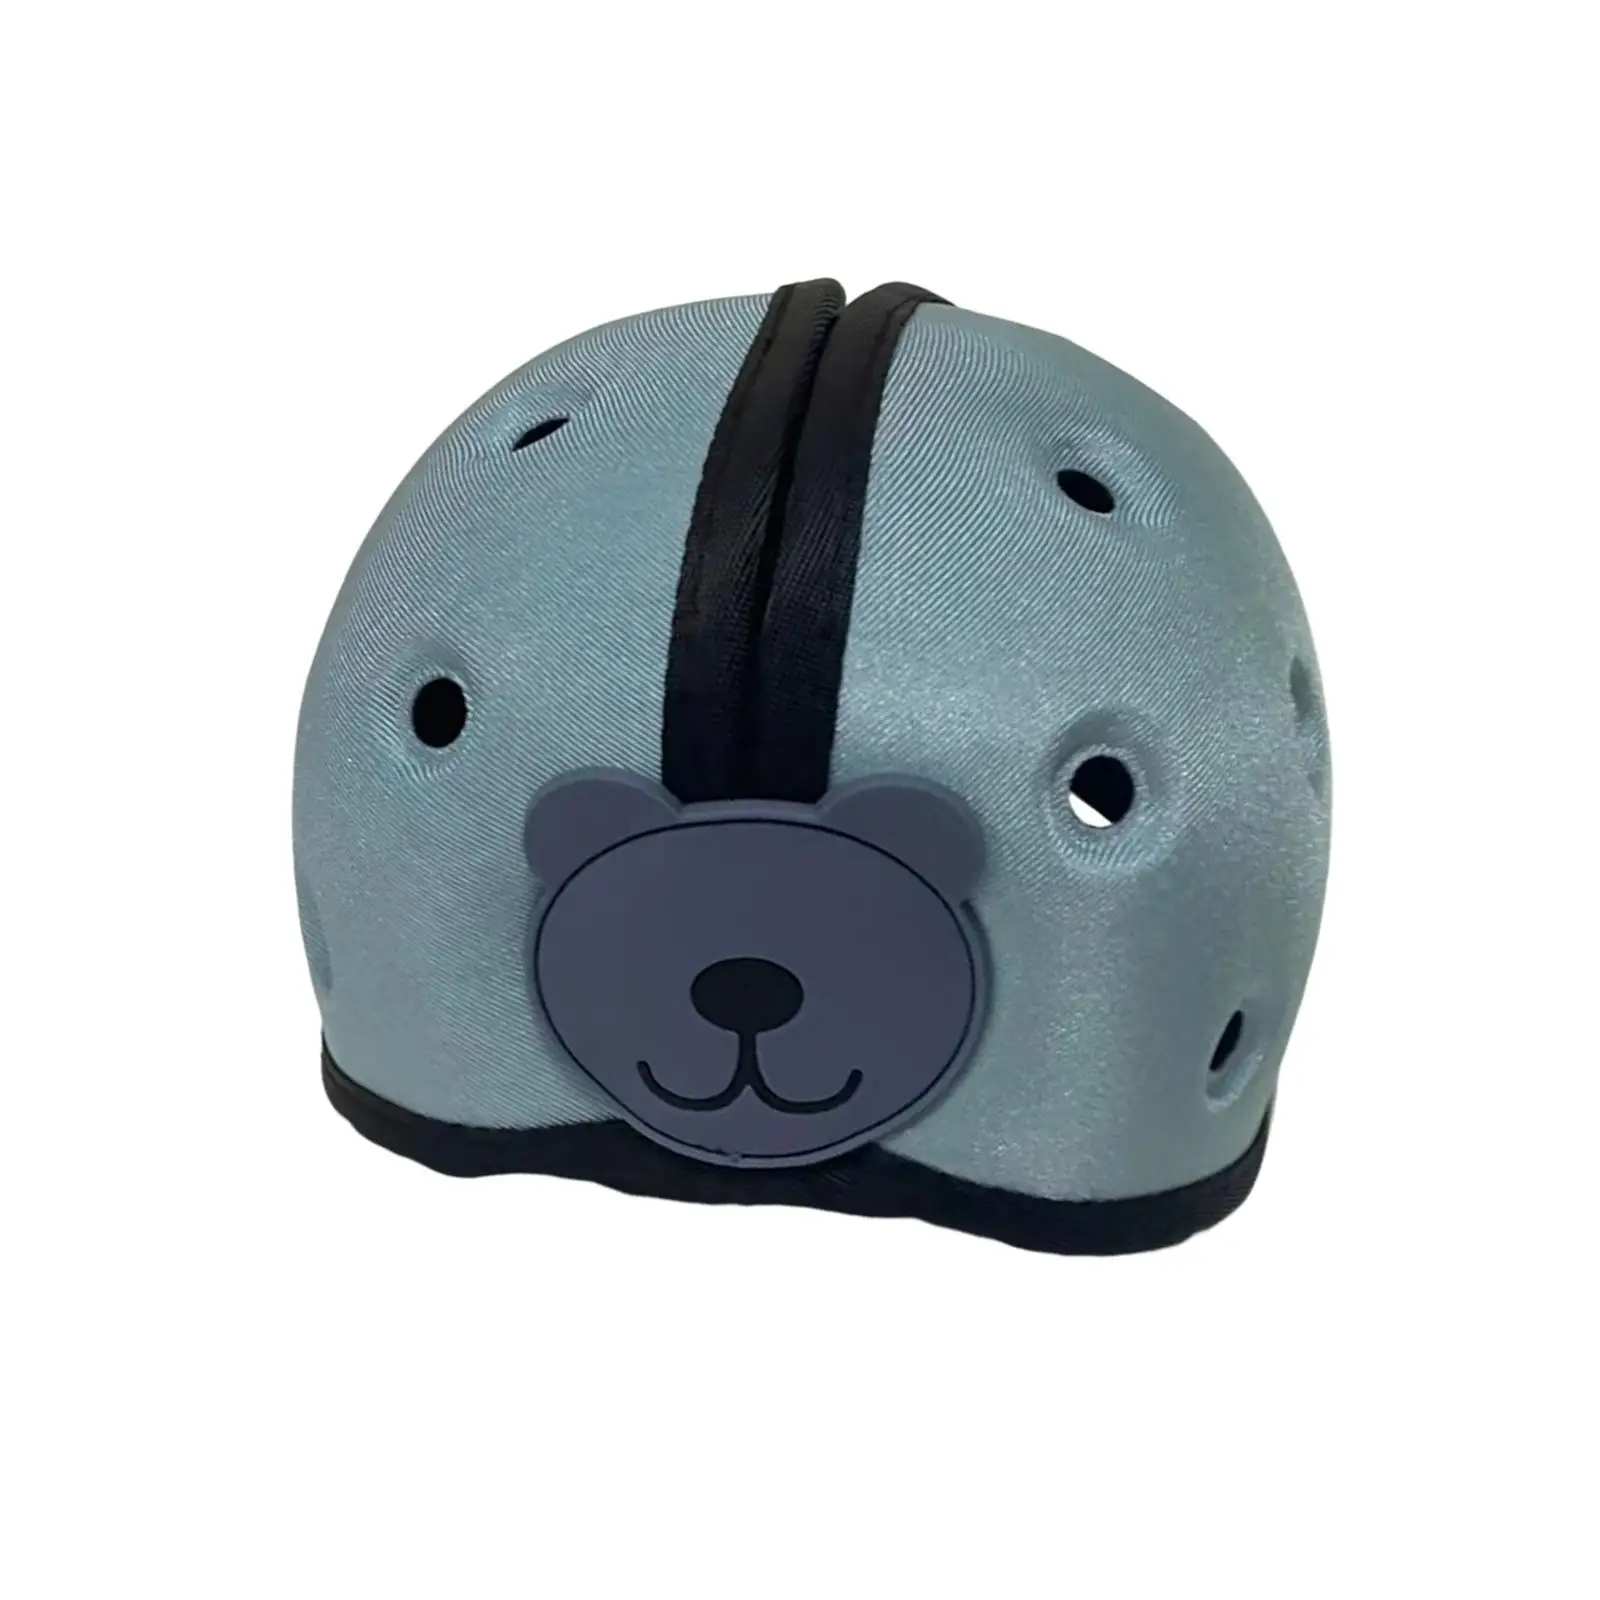  , Children headprotect for Toddler Children, Kids Crawling